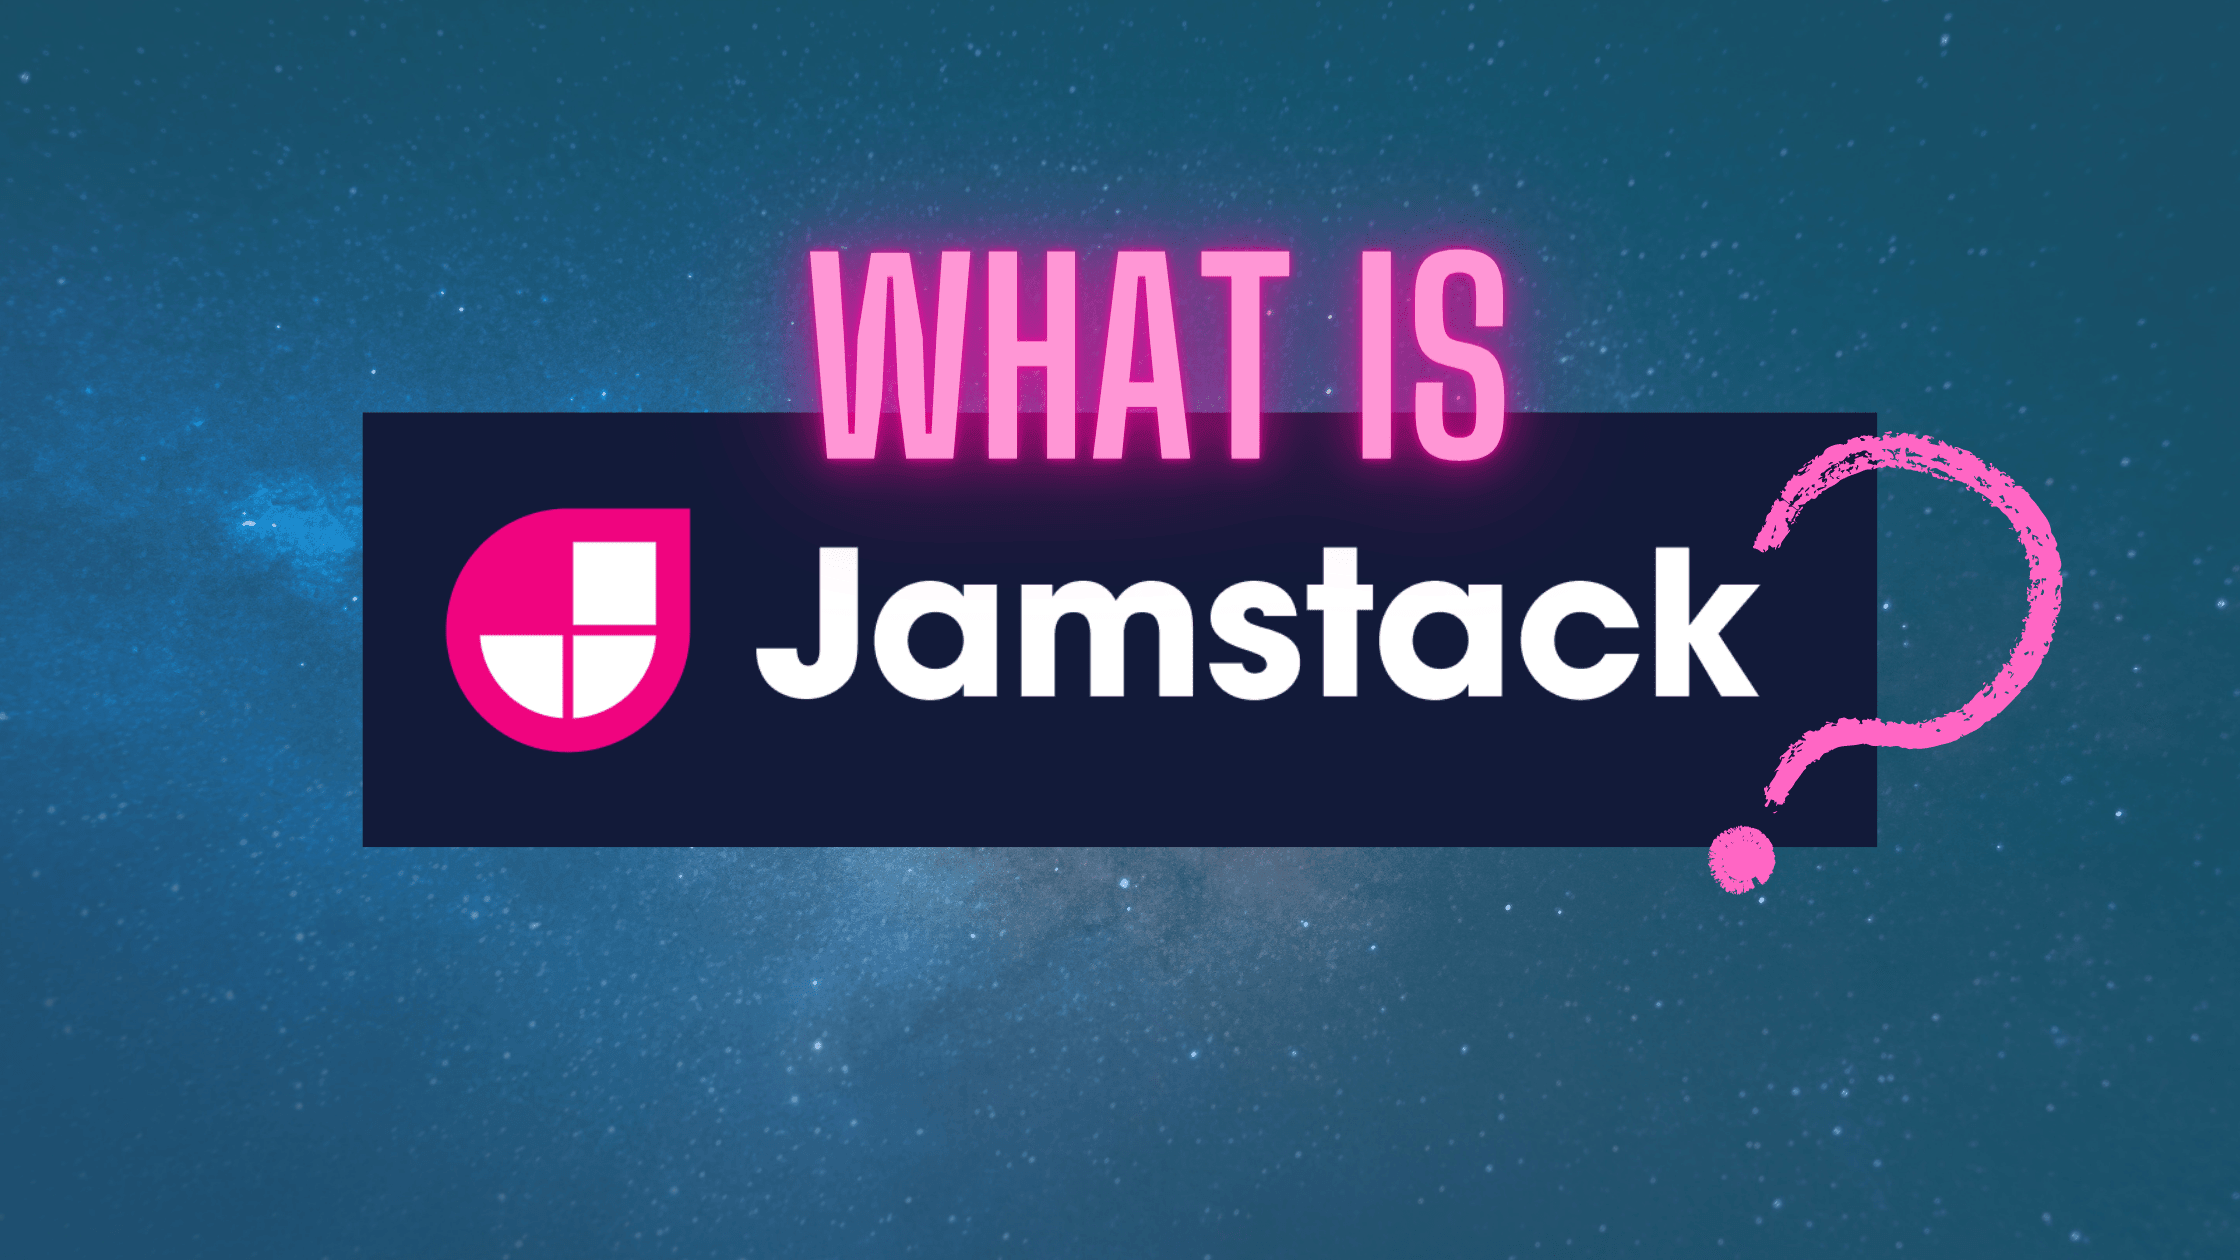 Jamstack: A new way to think about web development, build, and delivery